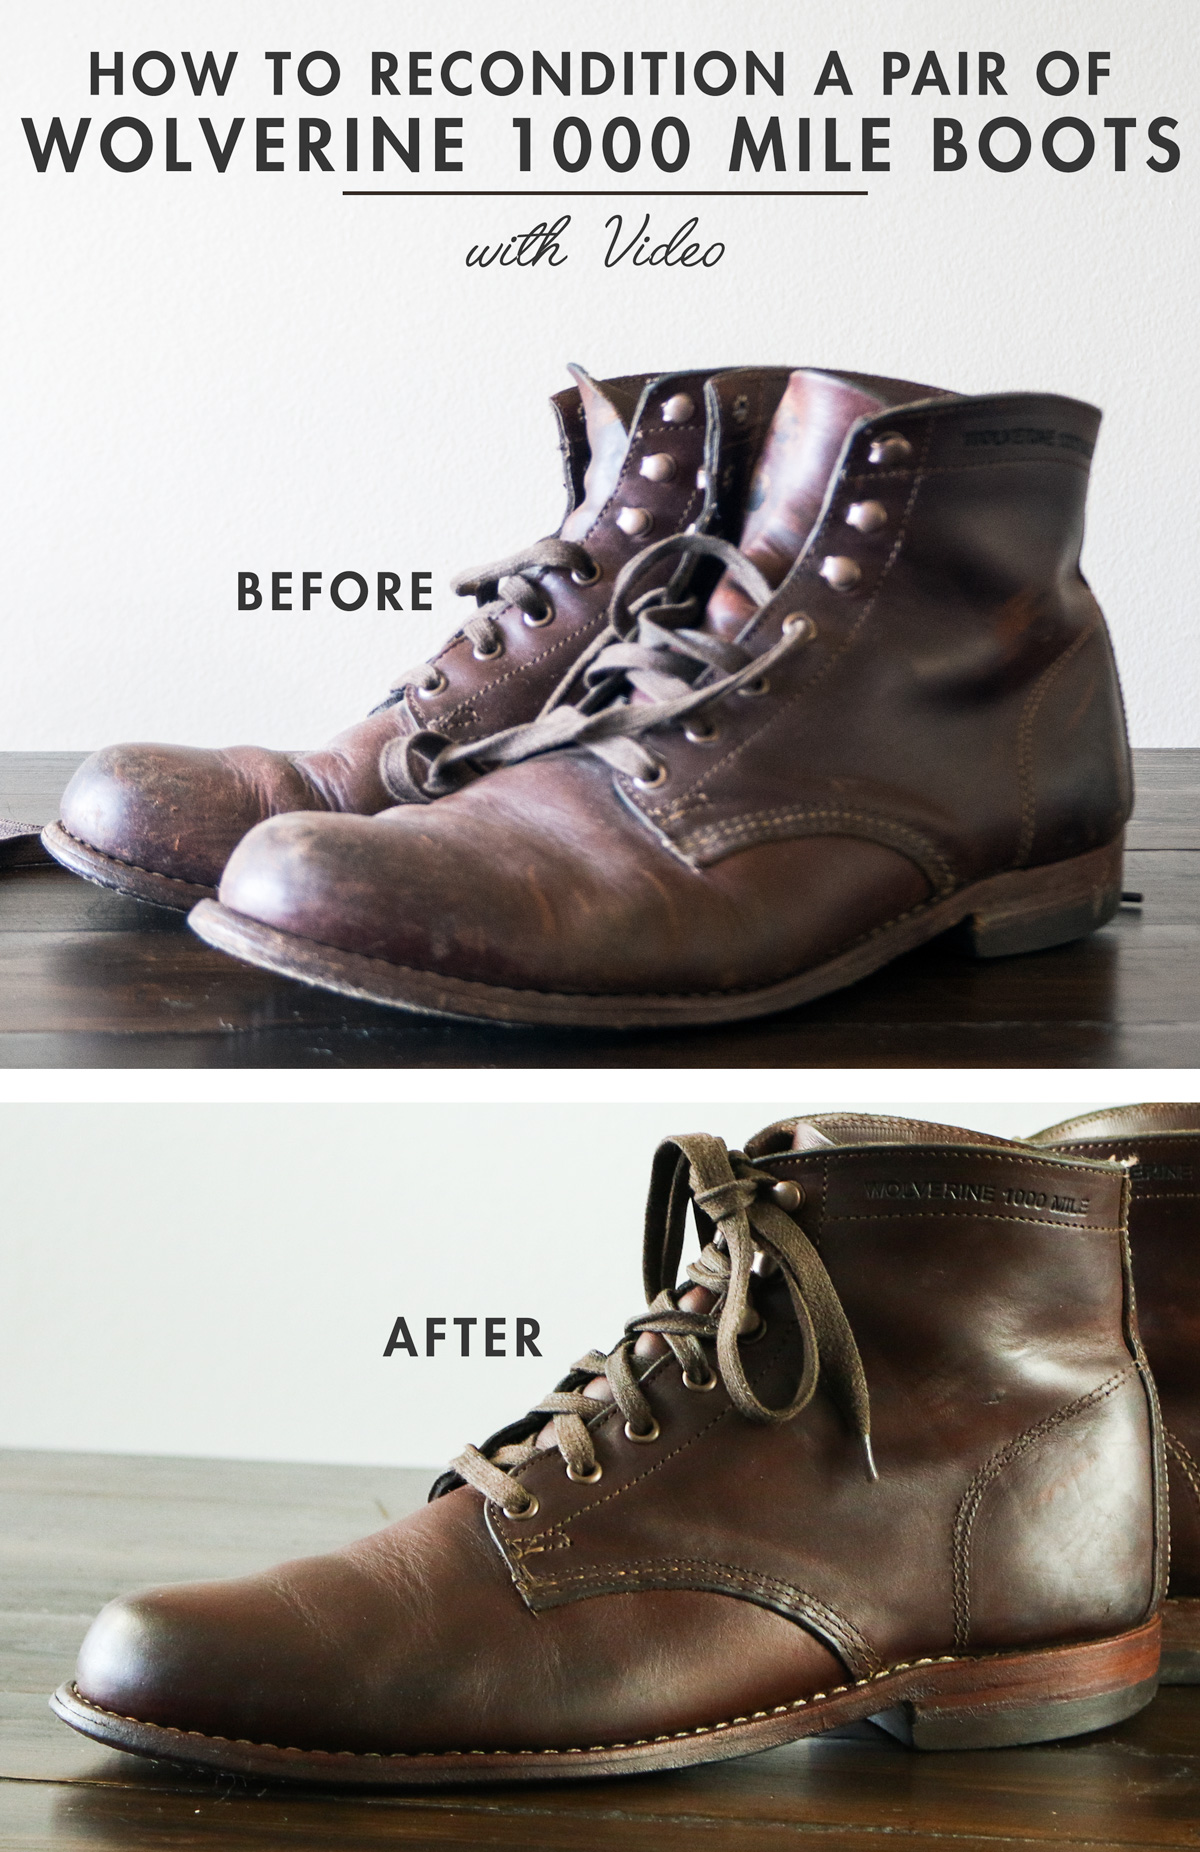 How to Recondition a Pair of Wolverine 1000 Mile Boots + Video!